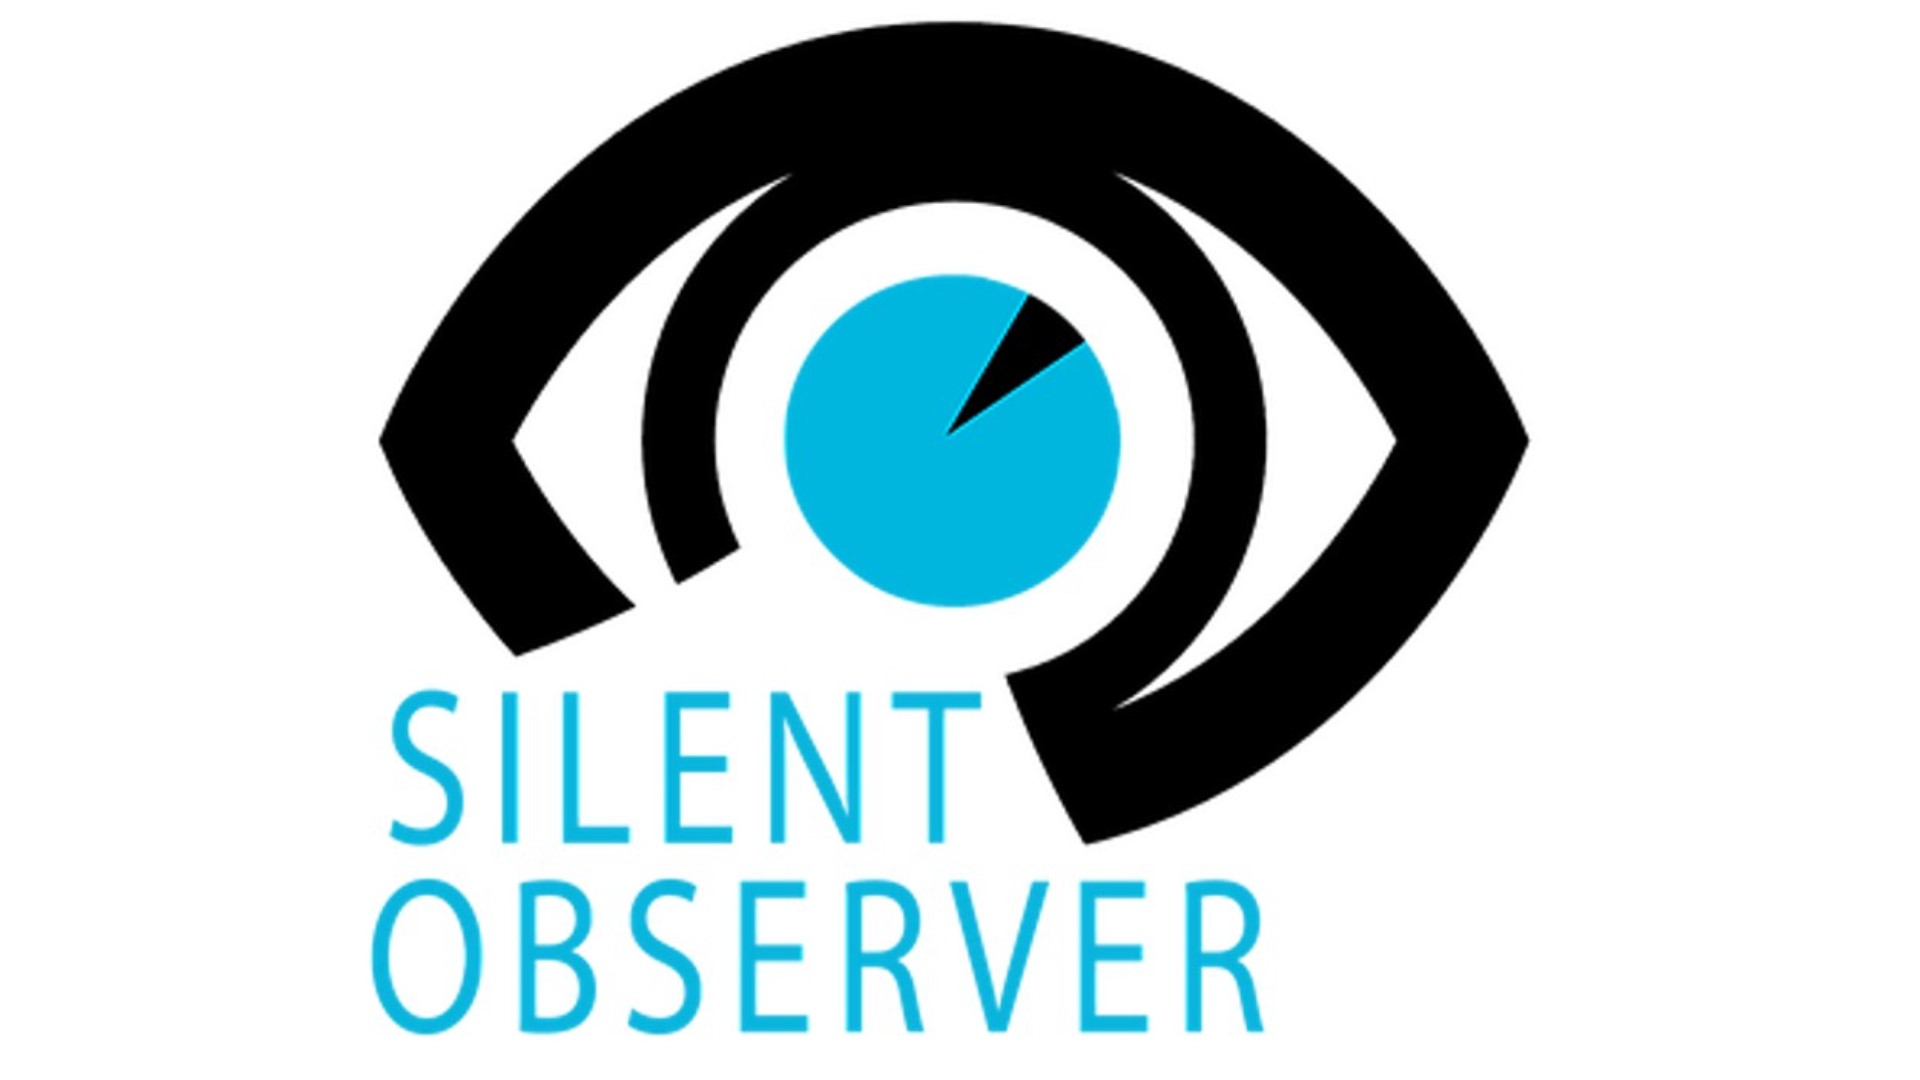 Silent Observer collects unsolved crime tips in many areas around West Michigan, and will now take tips for Ionia County.